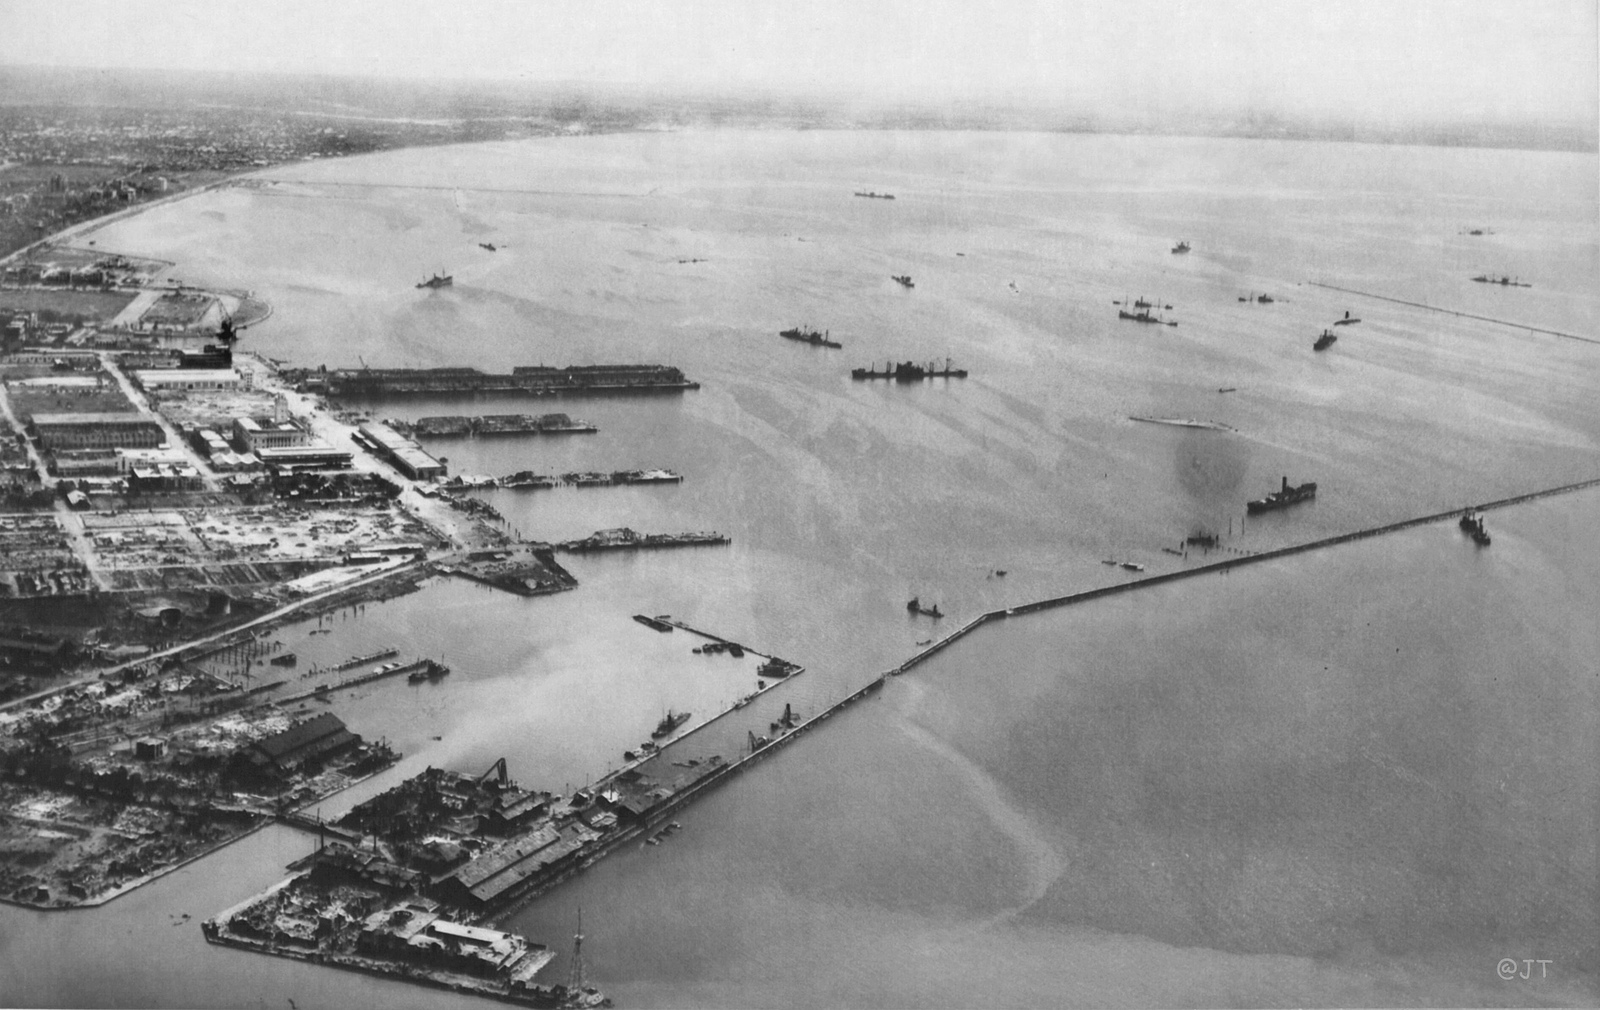 Manila Bay in February 1945 (US National Archives)